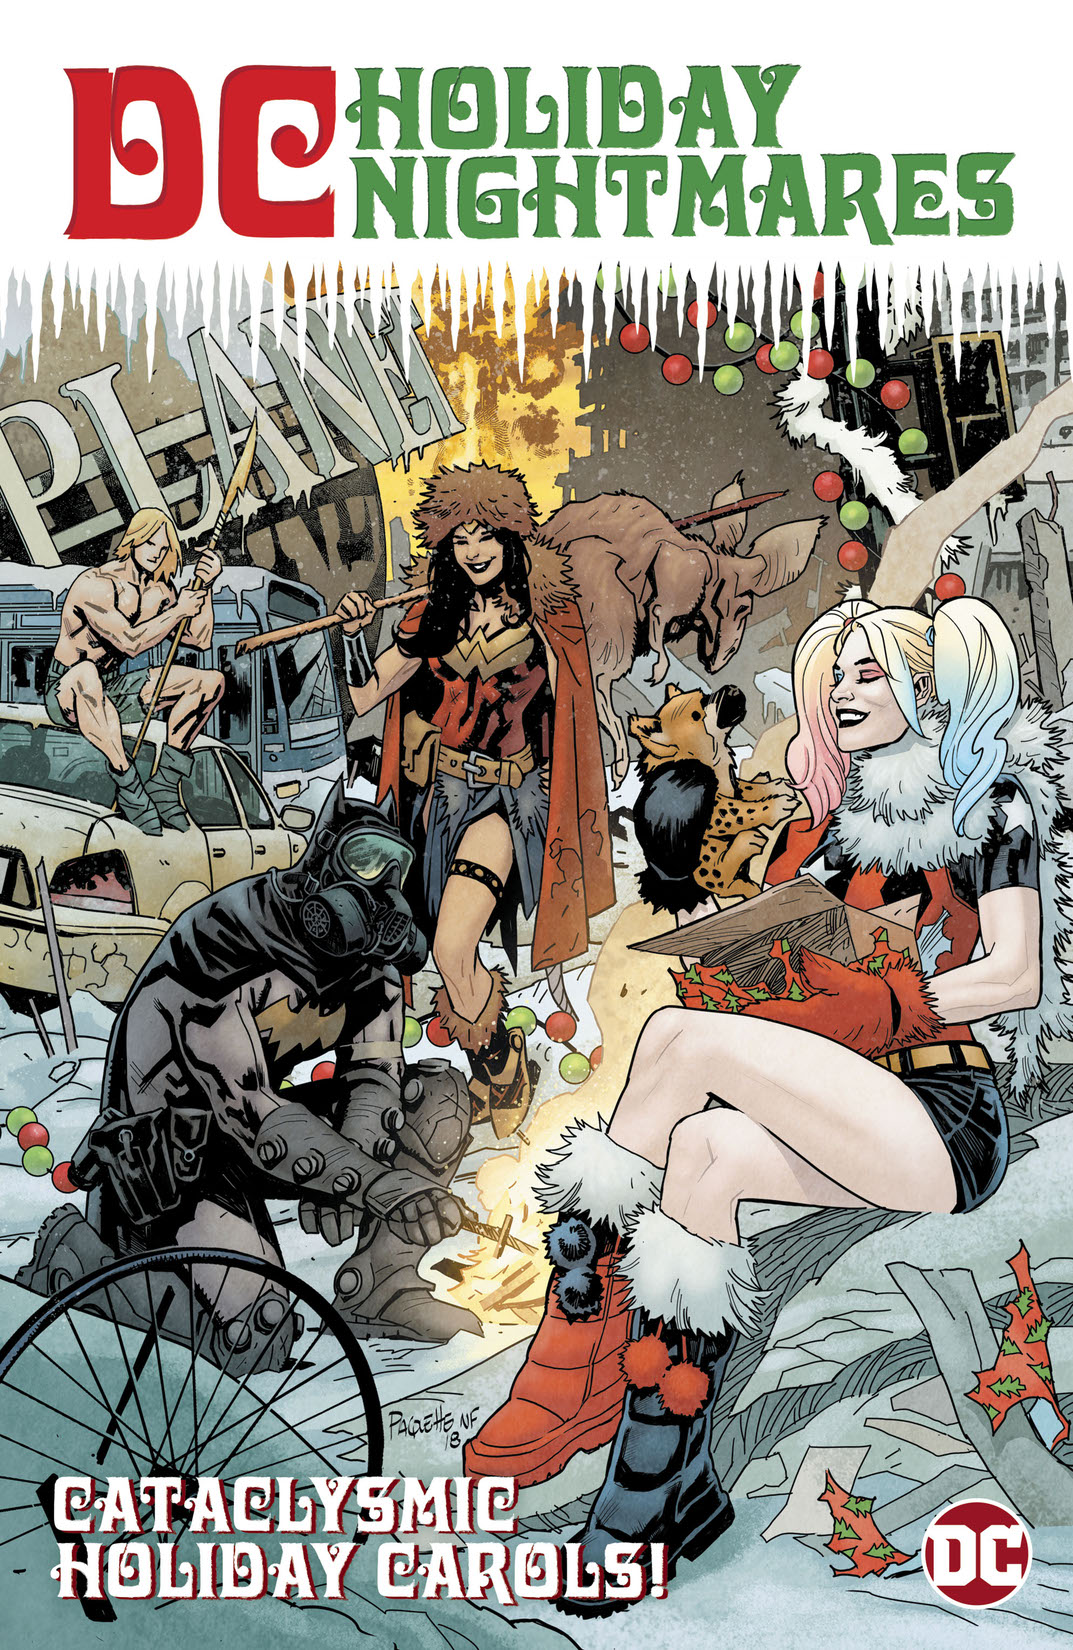 DC Holiday Nightmares preview images